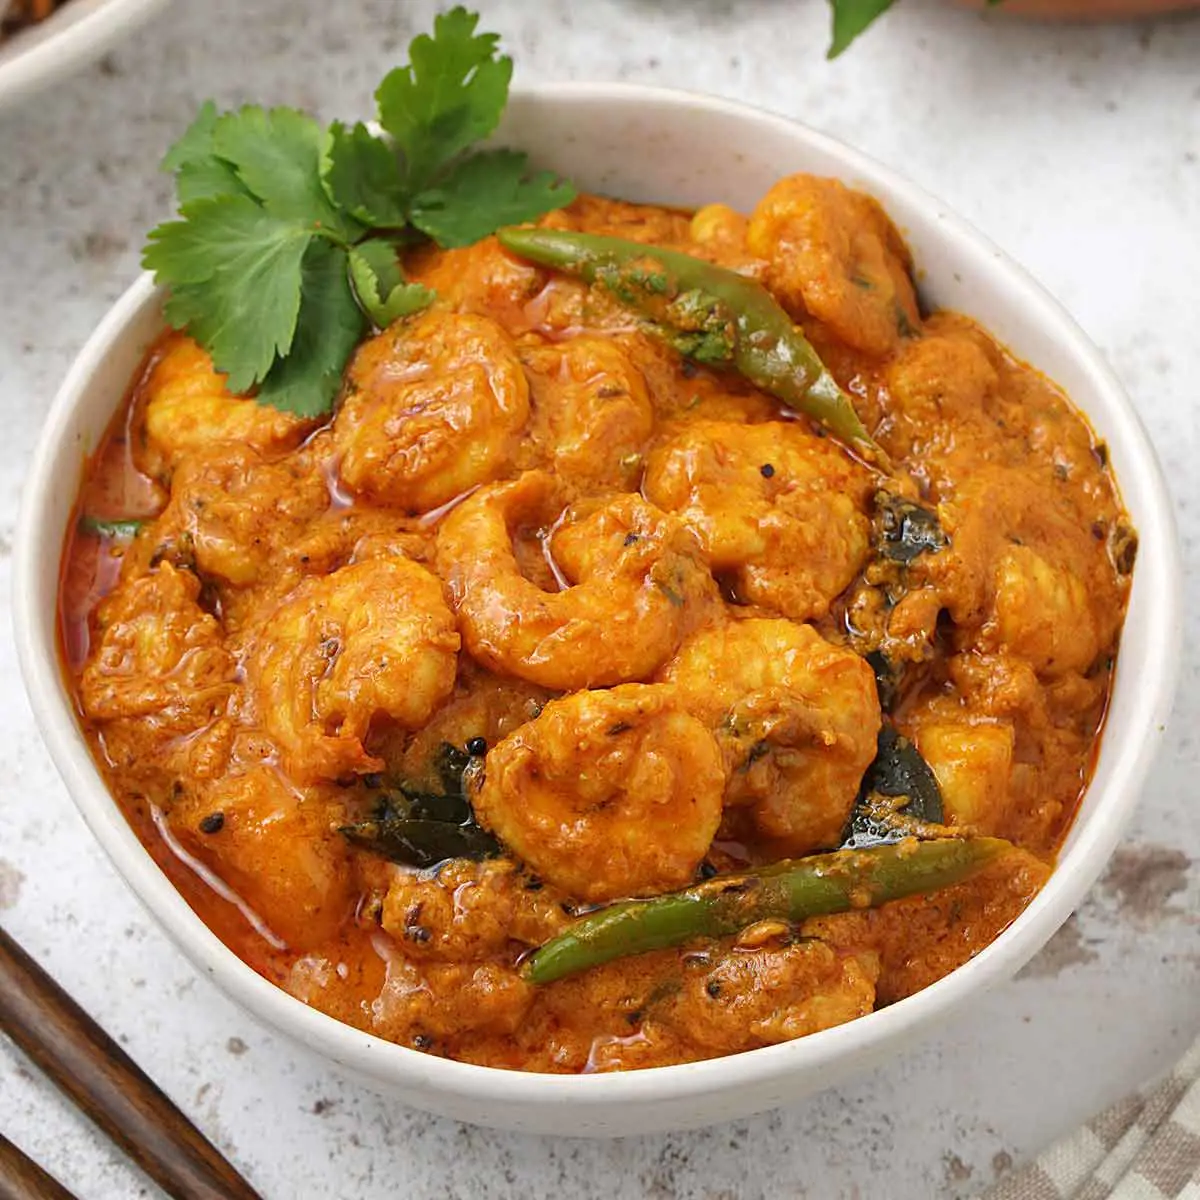 Coconut prawn curry is popular in coastal areas of India